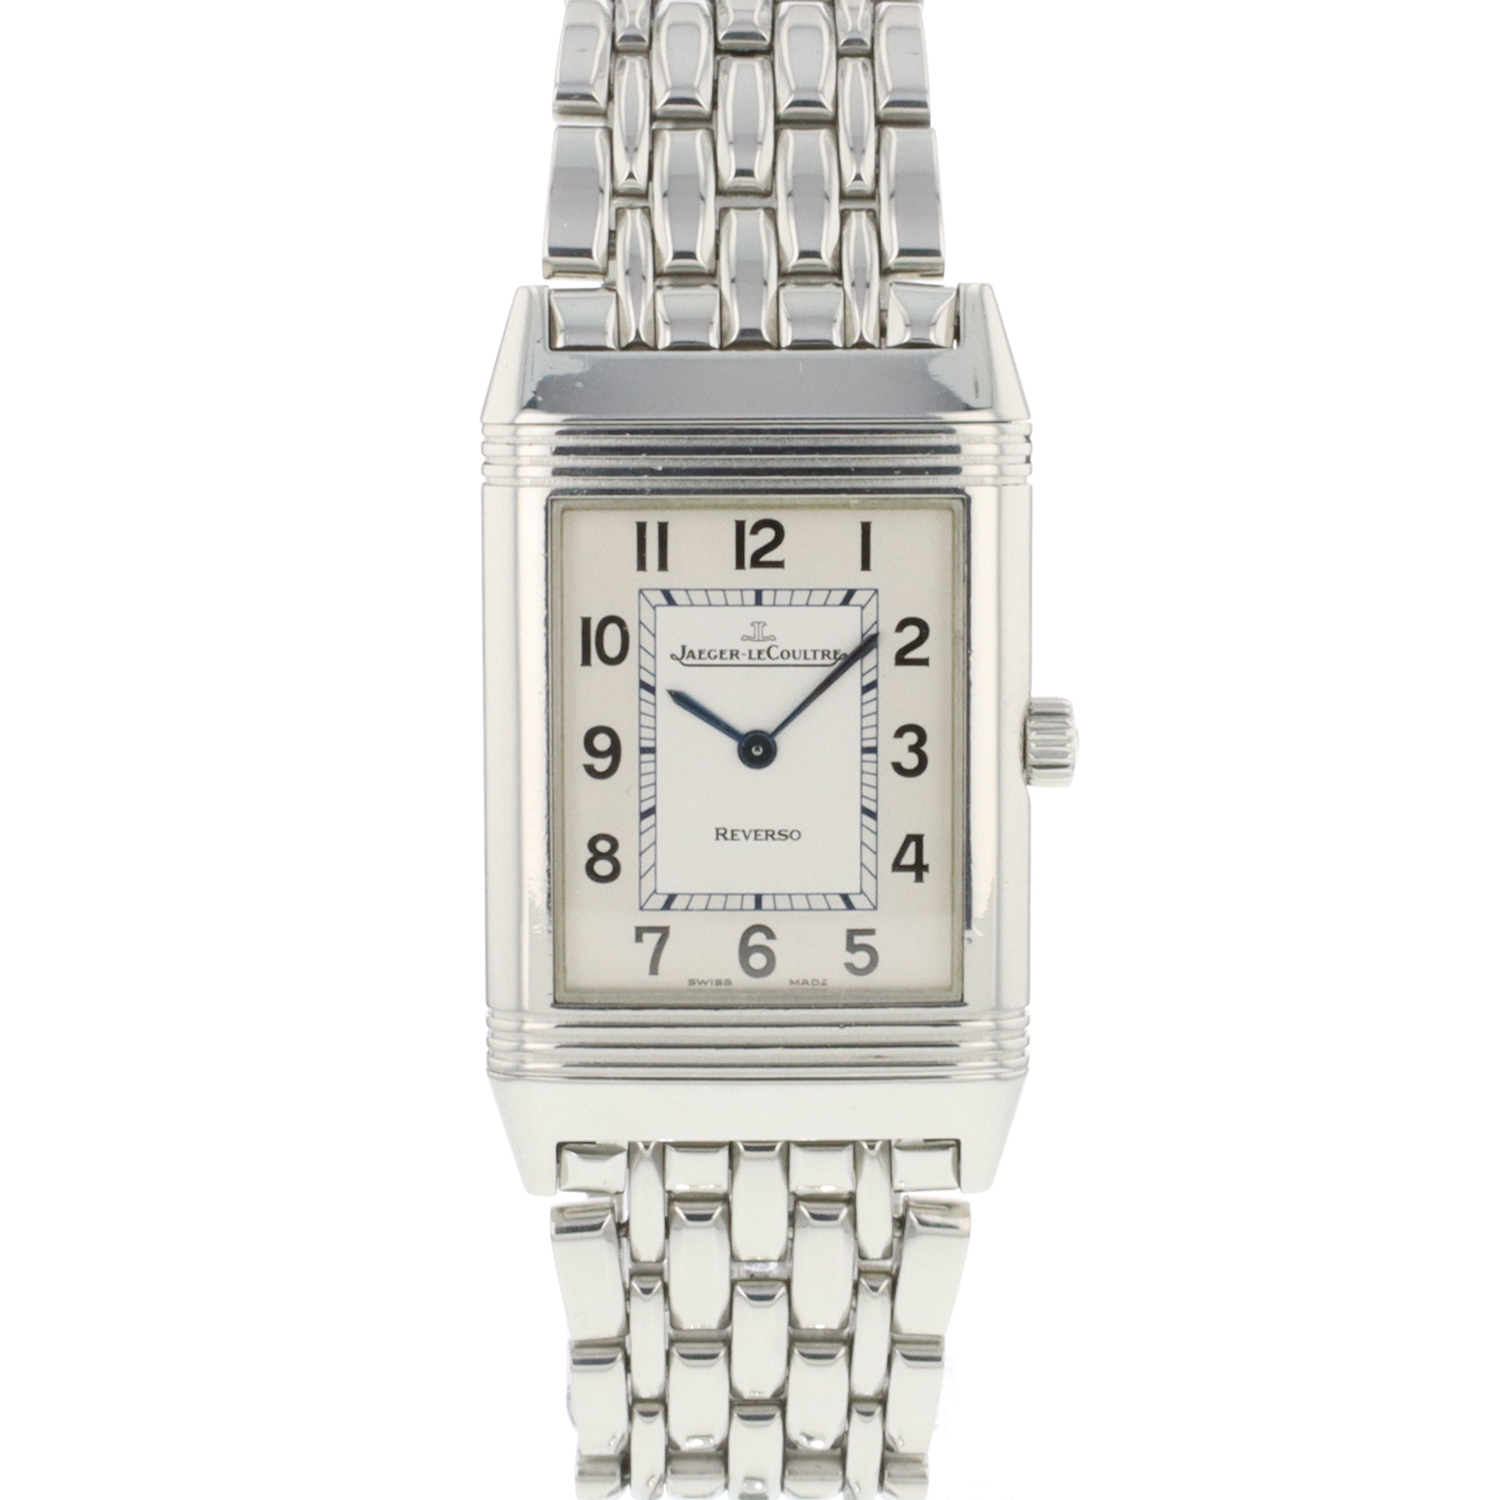 JAEGERLECOULTRE  REVERSO REFERENCE 270254 A PINK GOLD DUAL TIME ZONE  REVERSIBLE WRISTWATCH WITH 24 HOURS INDICATION AND BRACELET CIRCA 2000   Watches Weekly  Hong Kong  2020  Sothebys